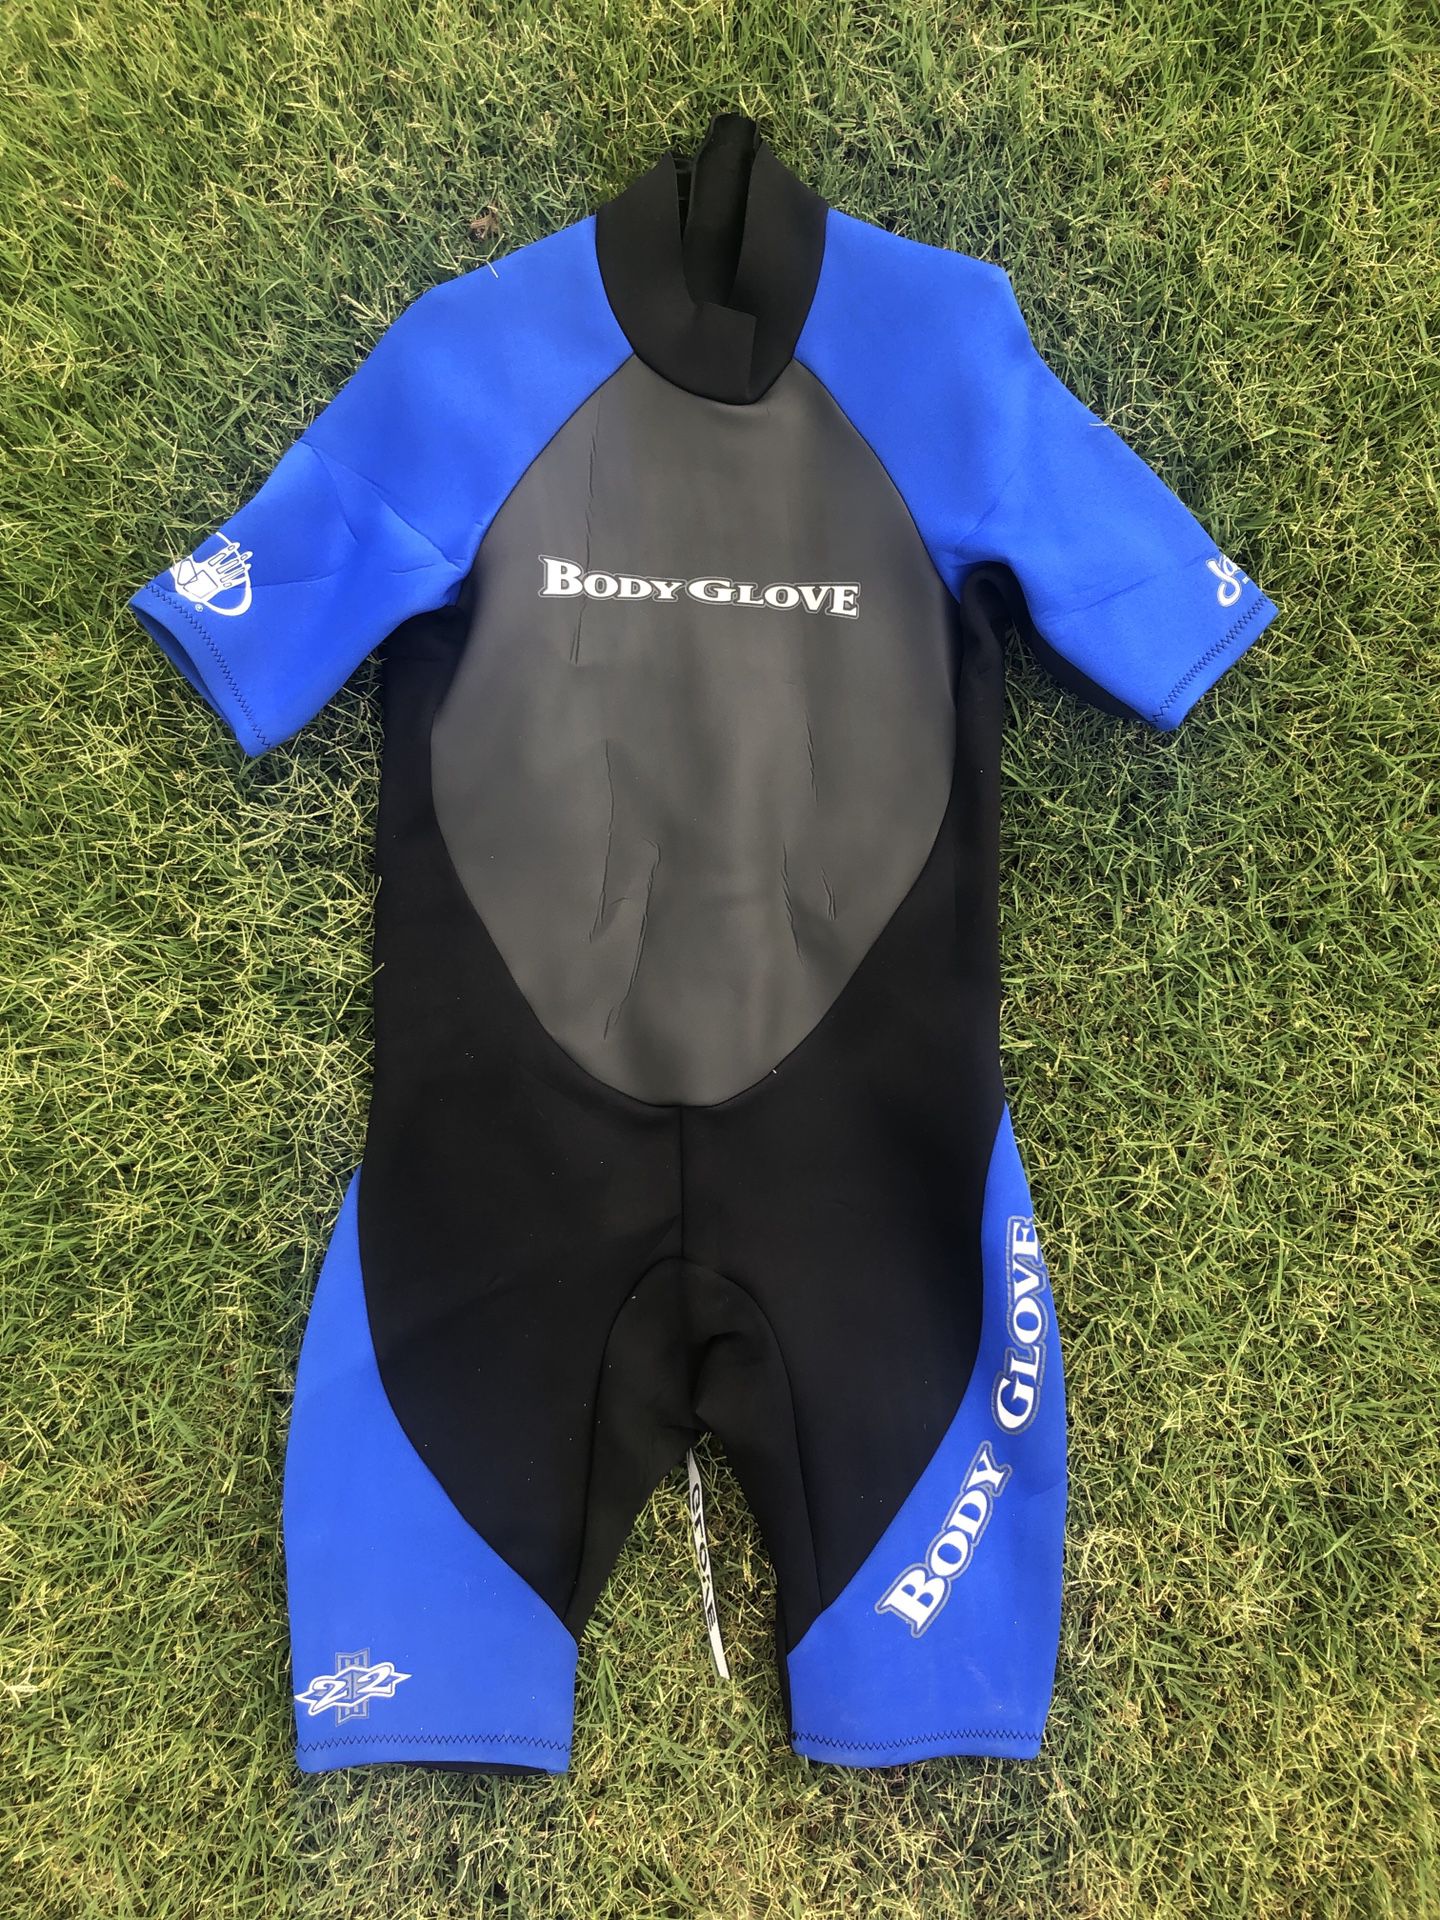 Body Glove Jammer Shorty 2:2 Wetsuit Men's XL Like New Condition!